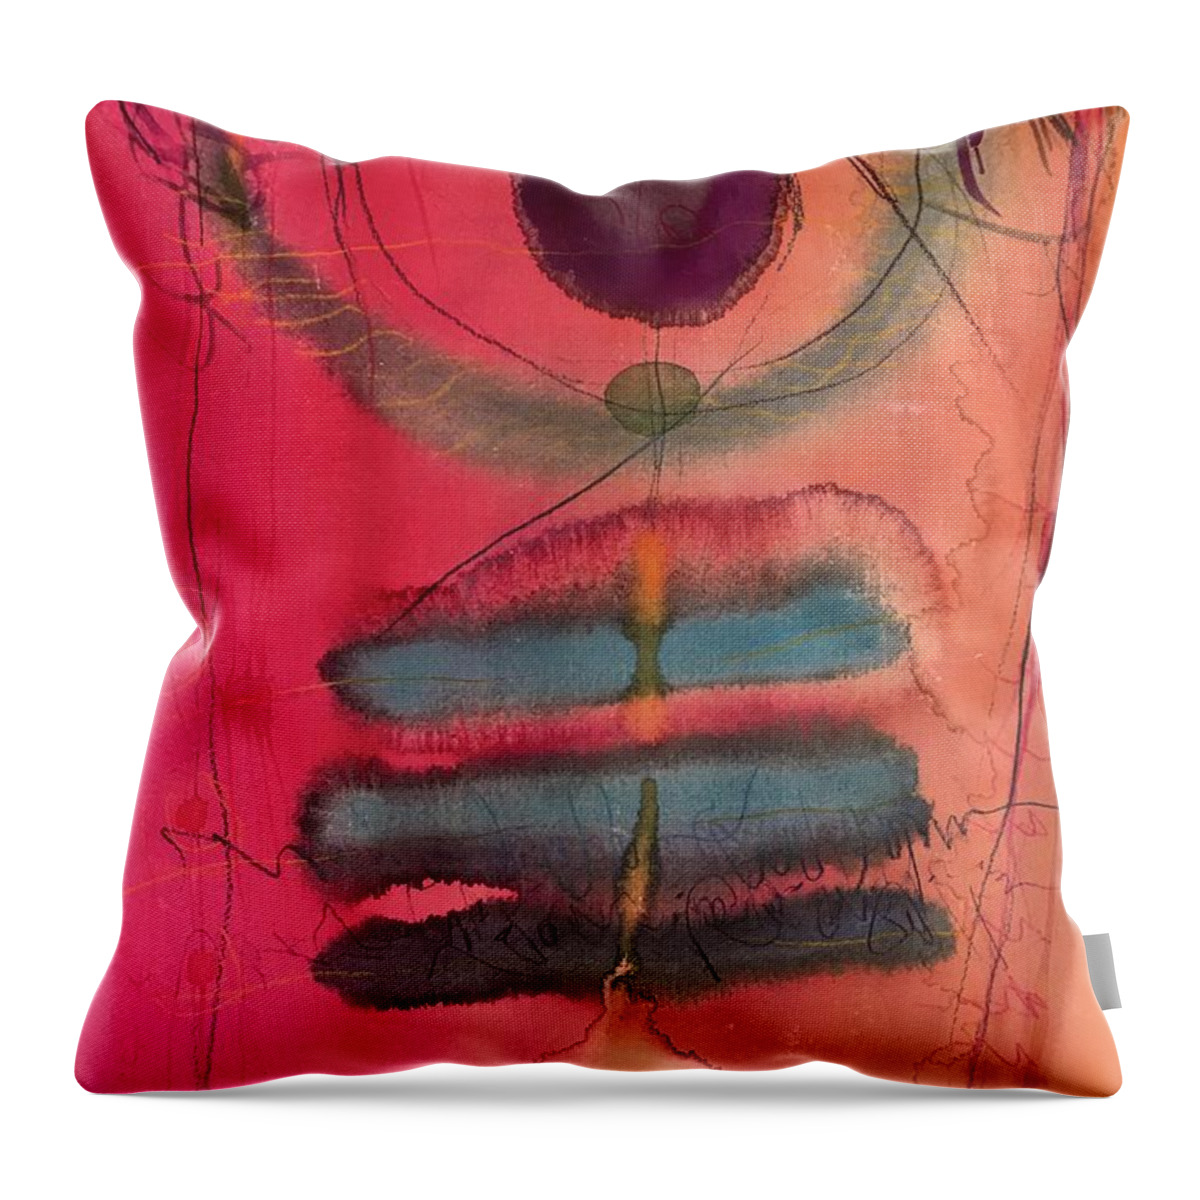 Watercolor Throw Pillow featuring the painting The Dance by Glen Neff